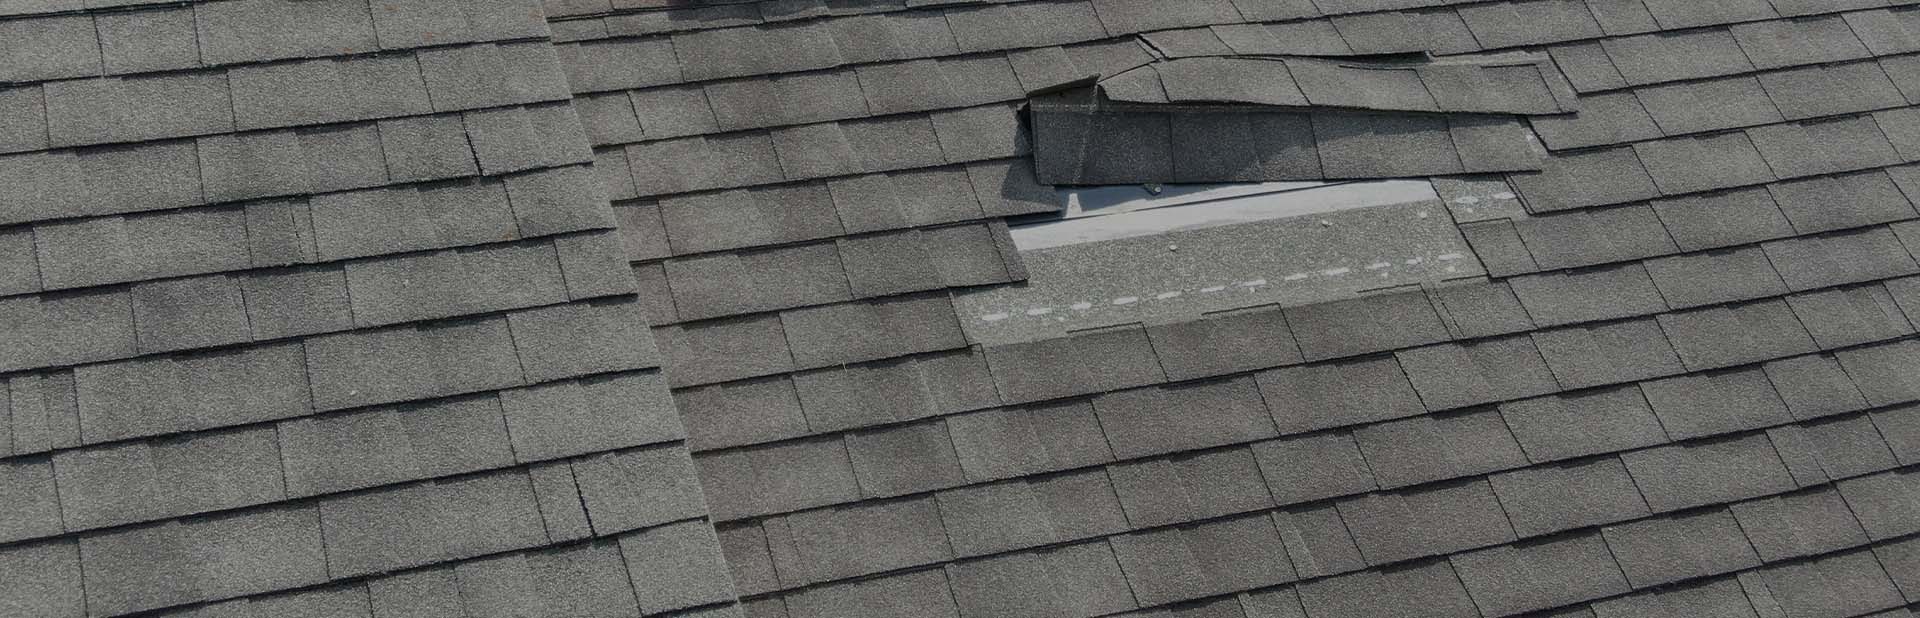 roof patch repair after storm damage